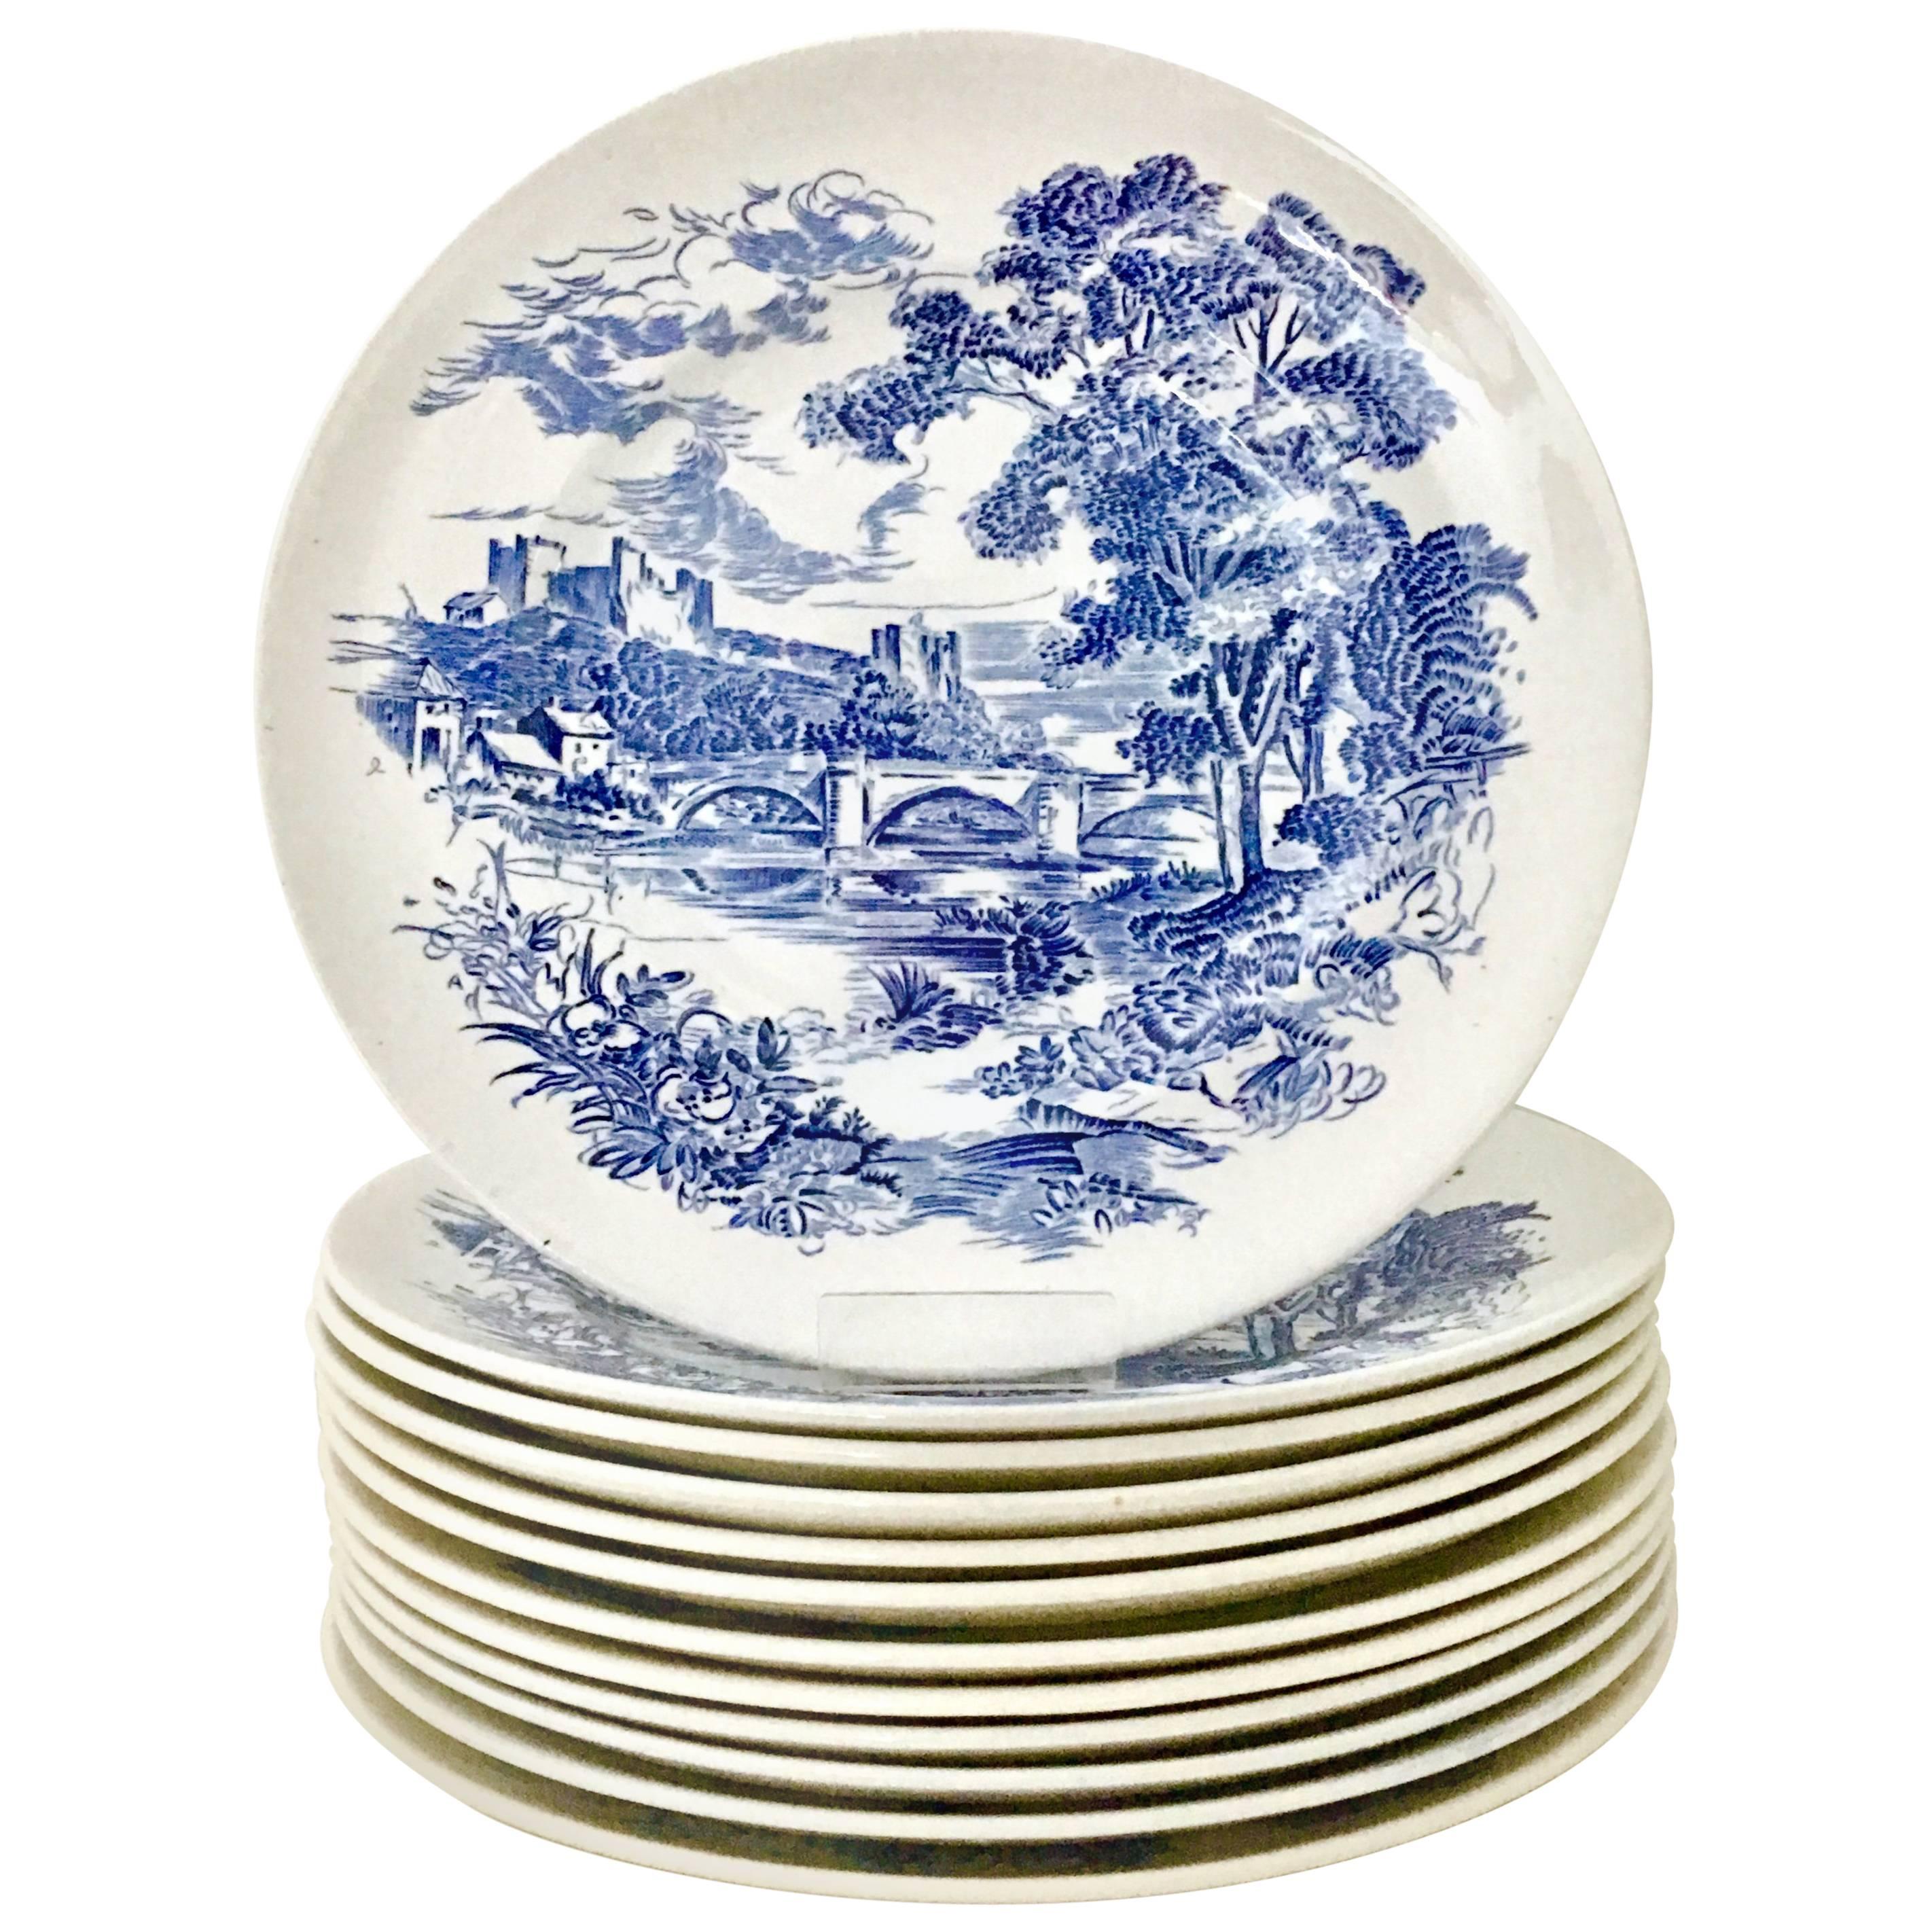 1950'Ss Wedgwood England Set of 12 Dinner Plates "Countryside Blue"